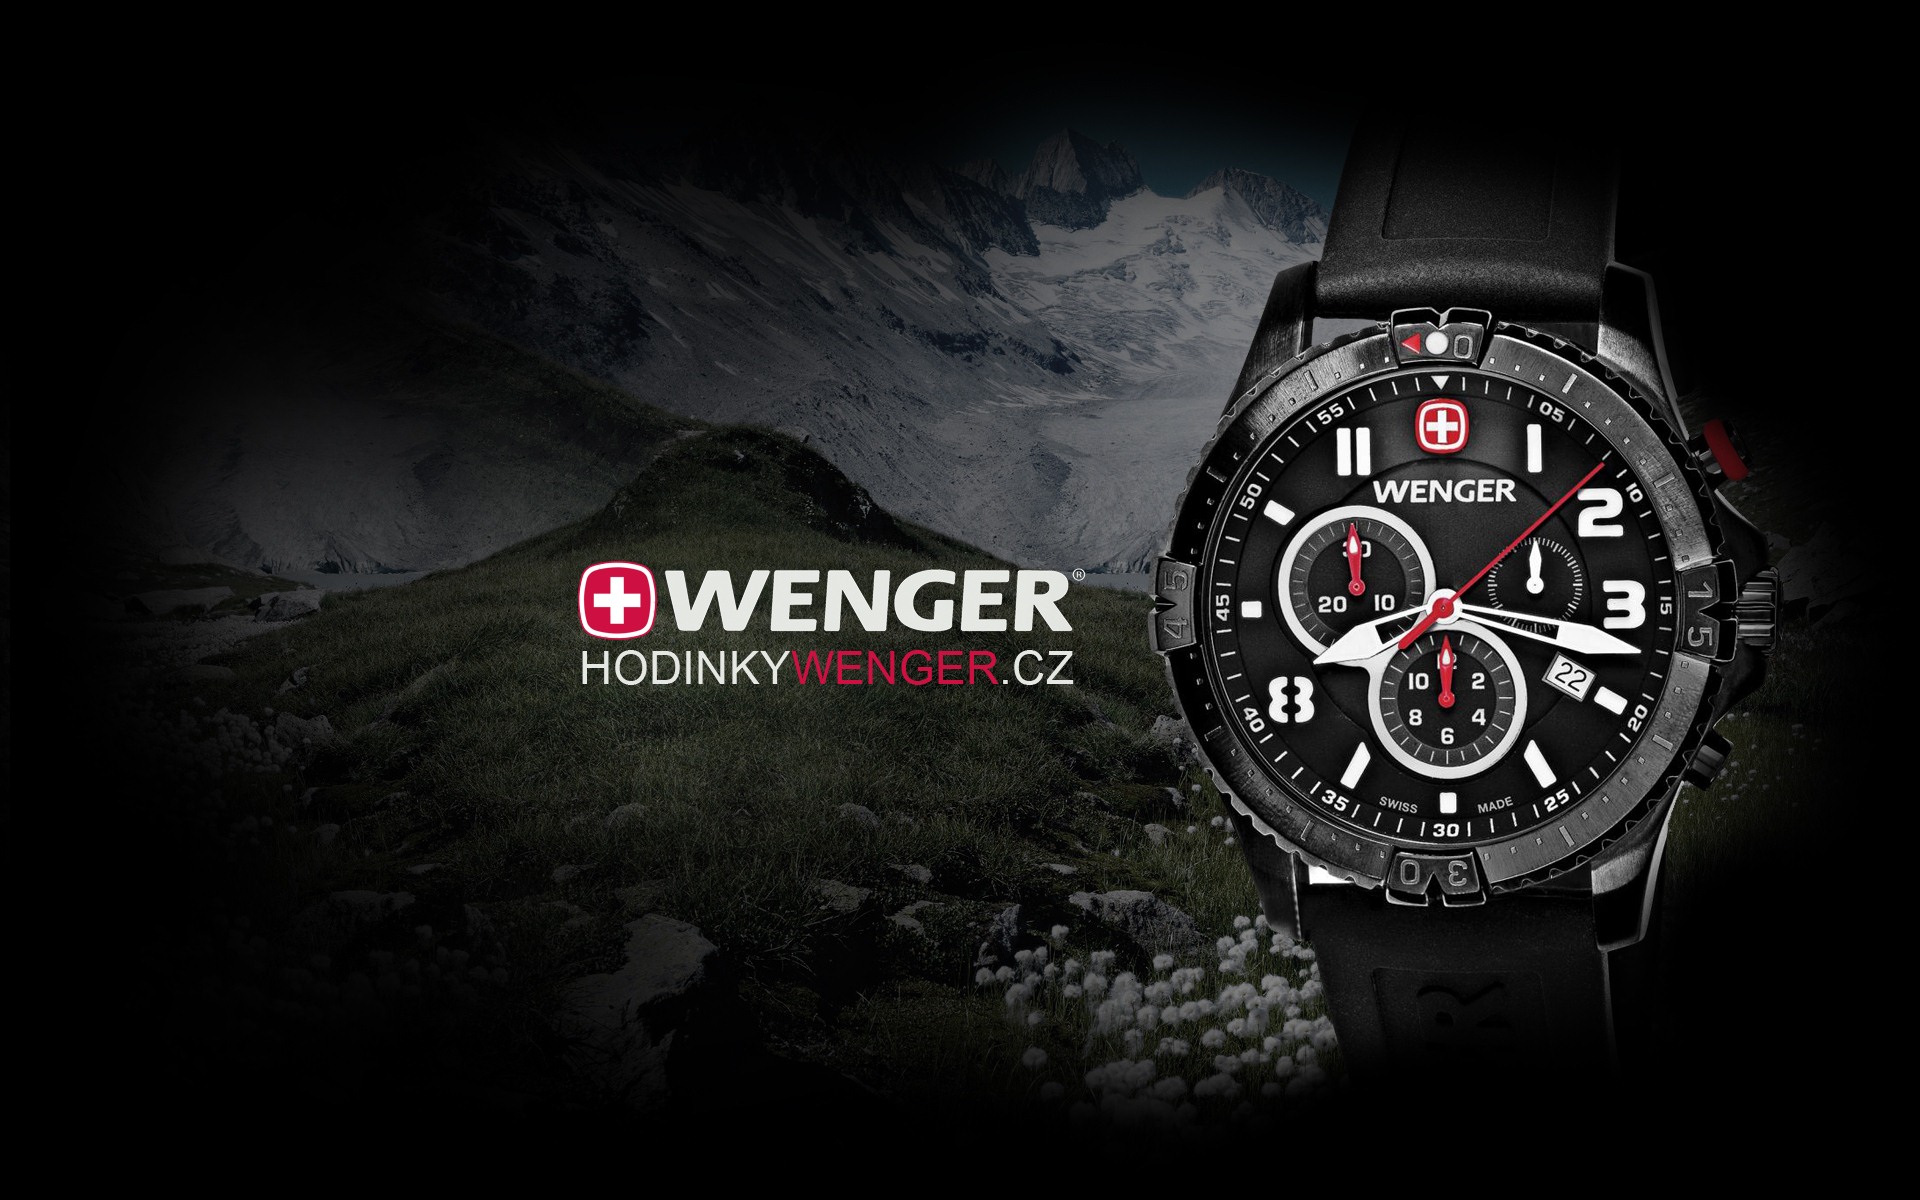 World famous watches wallpapers (1) #1 - 1920x1200